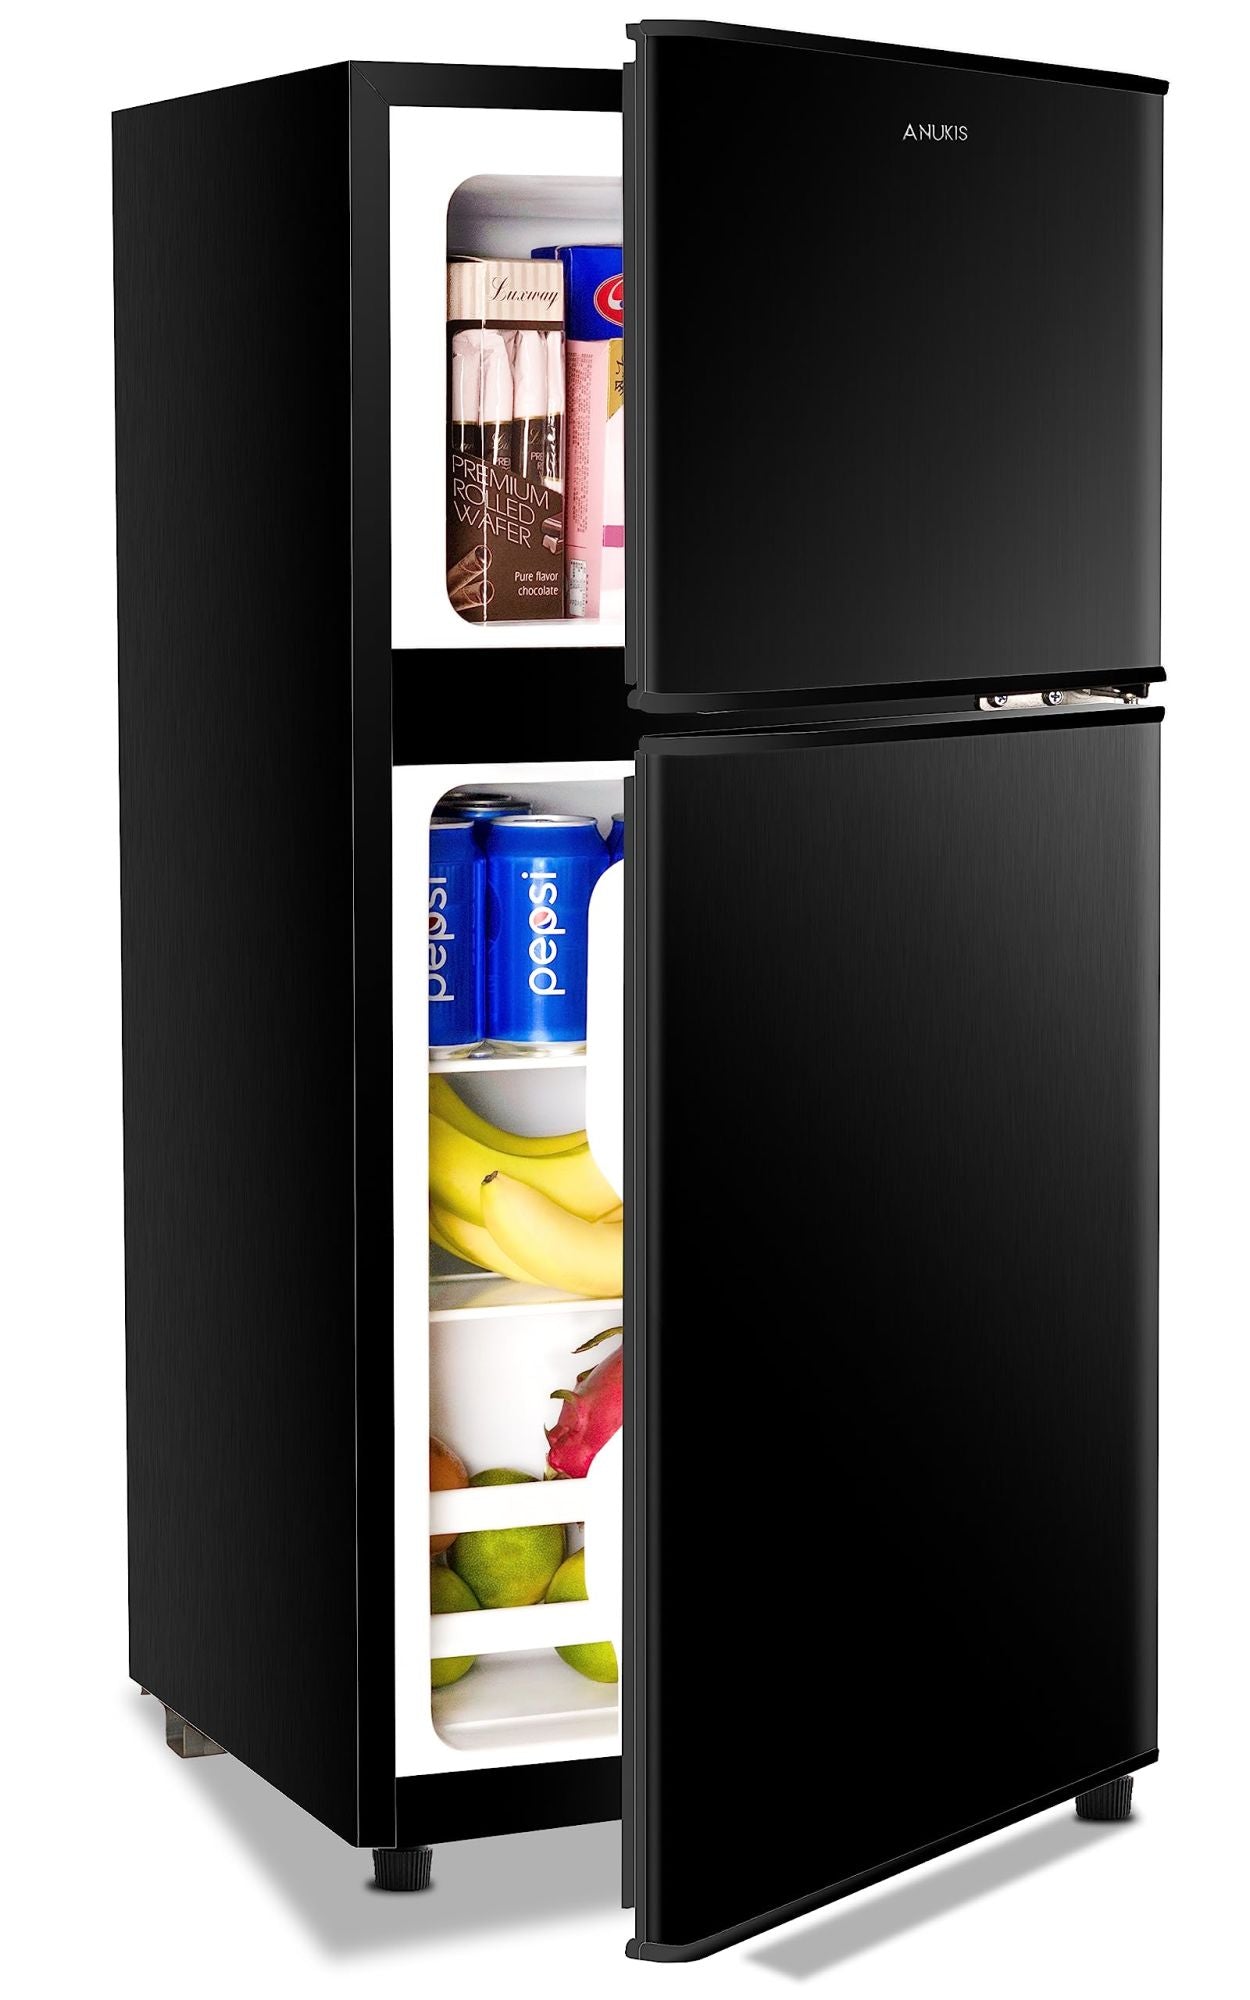 KRIB BLING 3.5Cu.Ft Compact Refrigerator Mini Fridge with Freezer, Small Refrigerator with 2 Door, 7 Level Thermostat Removable Shelves for Kitchen, Dorm, Apartment, Bar, Office, Silver/Black/Blue